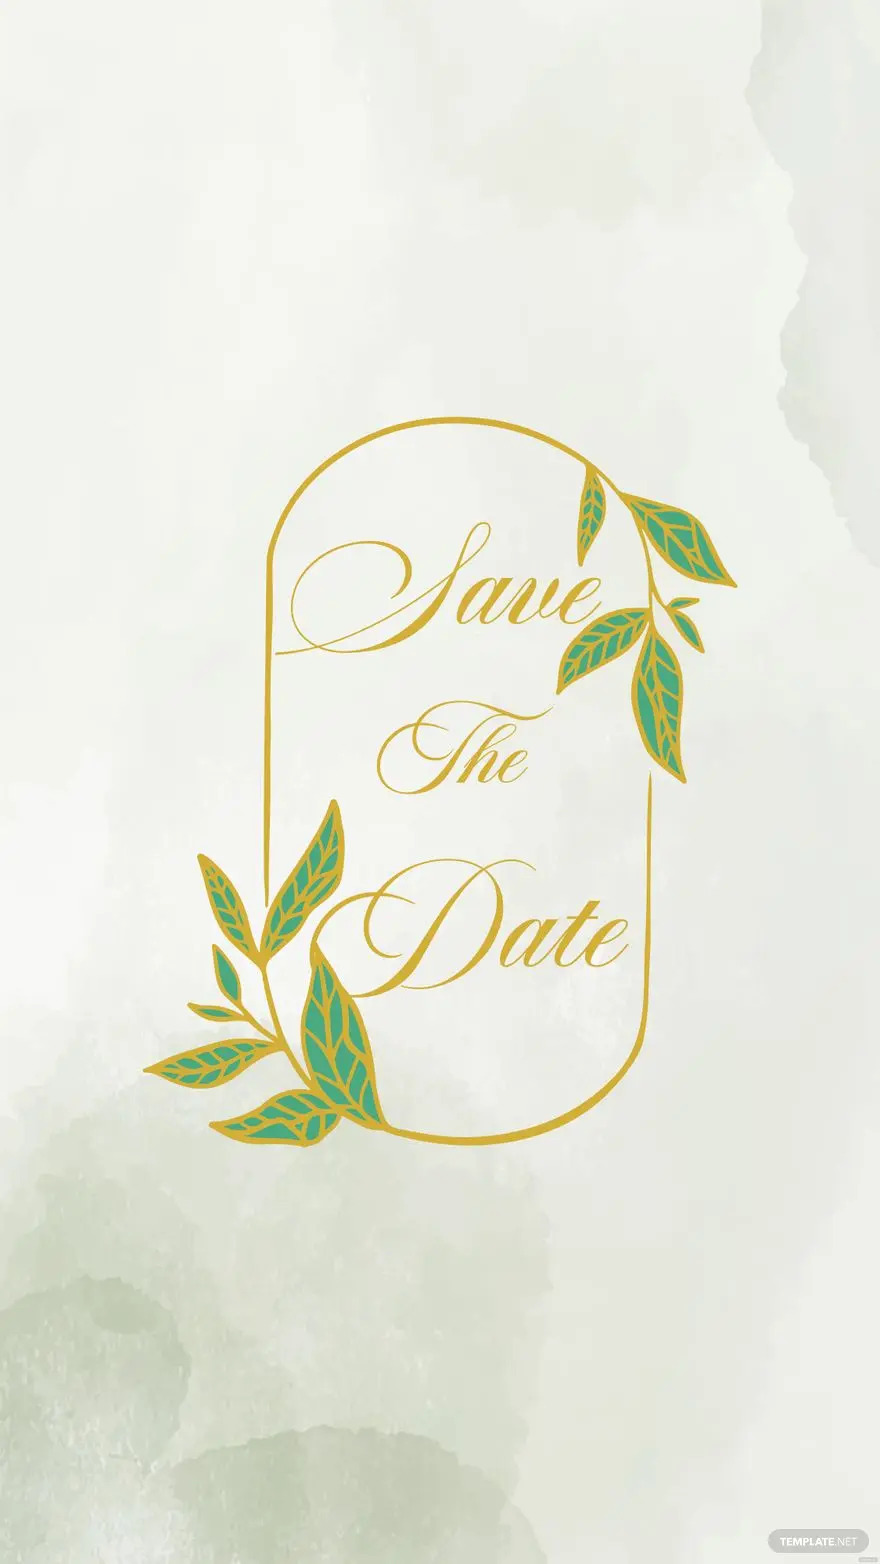 save the date mobile wallpaper ideas and examples